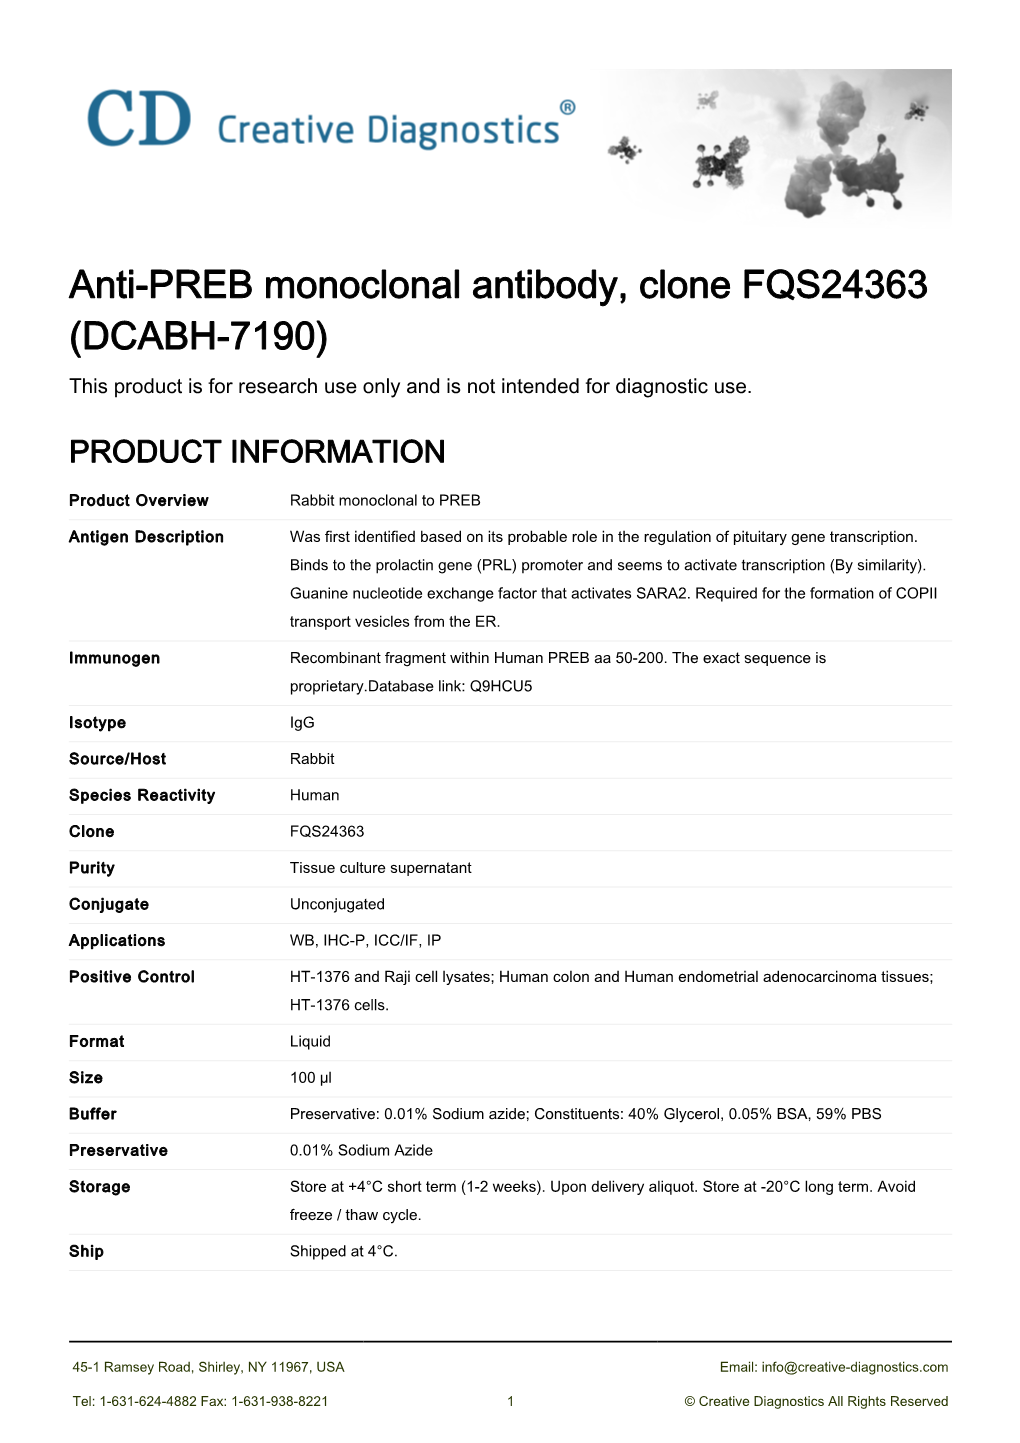 Anti-PREB Monoclonal Antibody, Clone FQS24363 (DCABH-7190) This Product Is for Research Use Only and Is Not Intended for Diagnostic Use